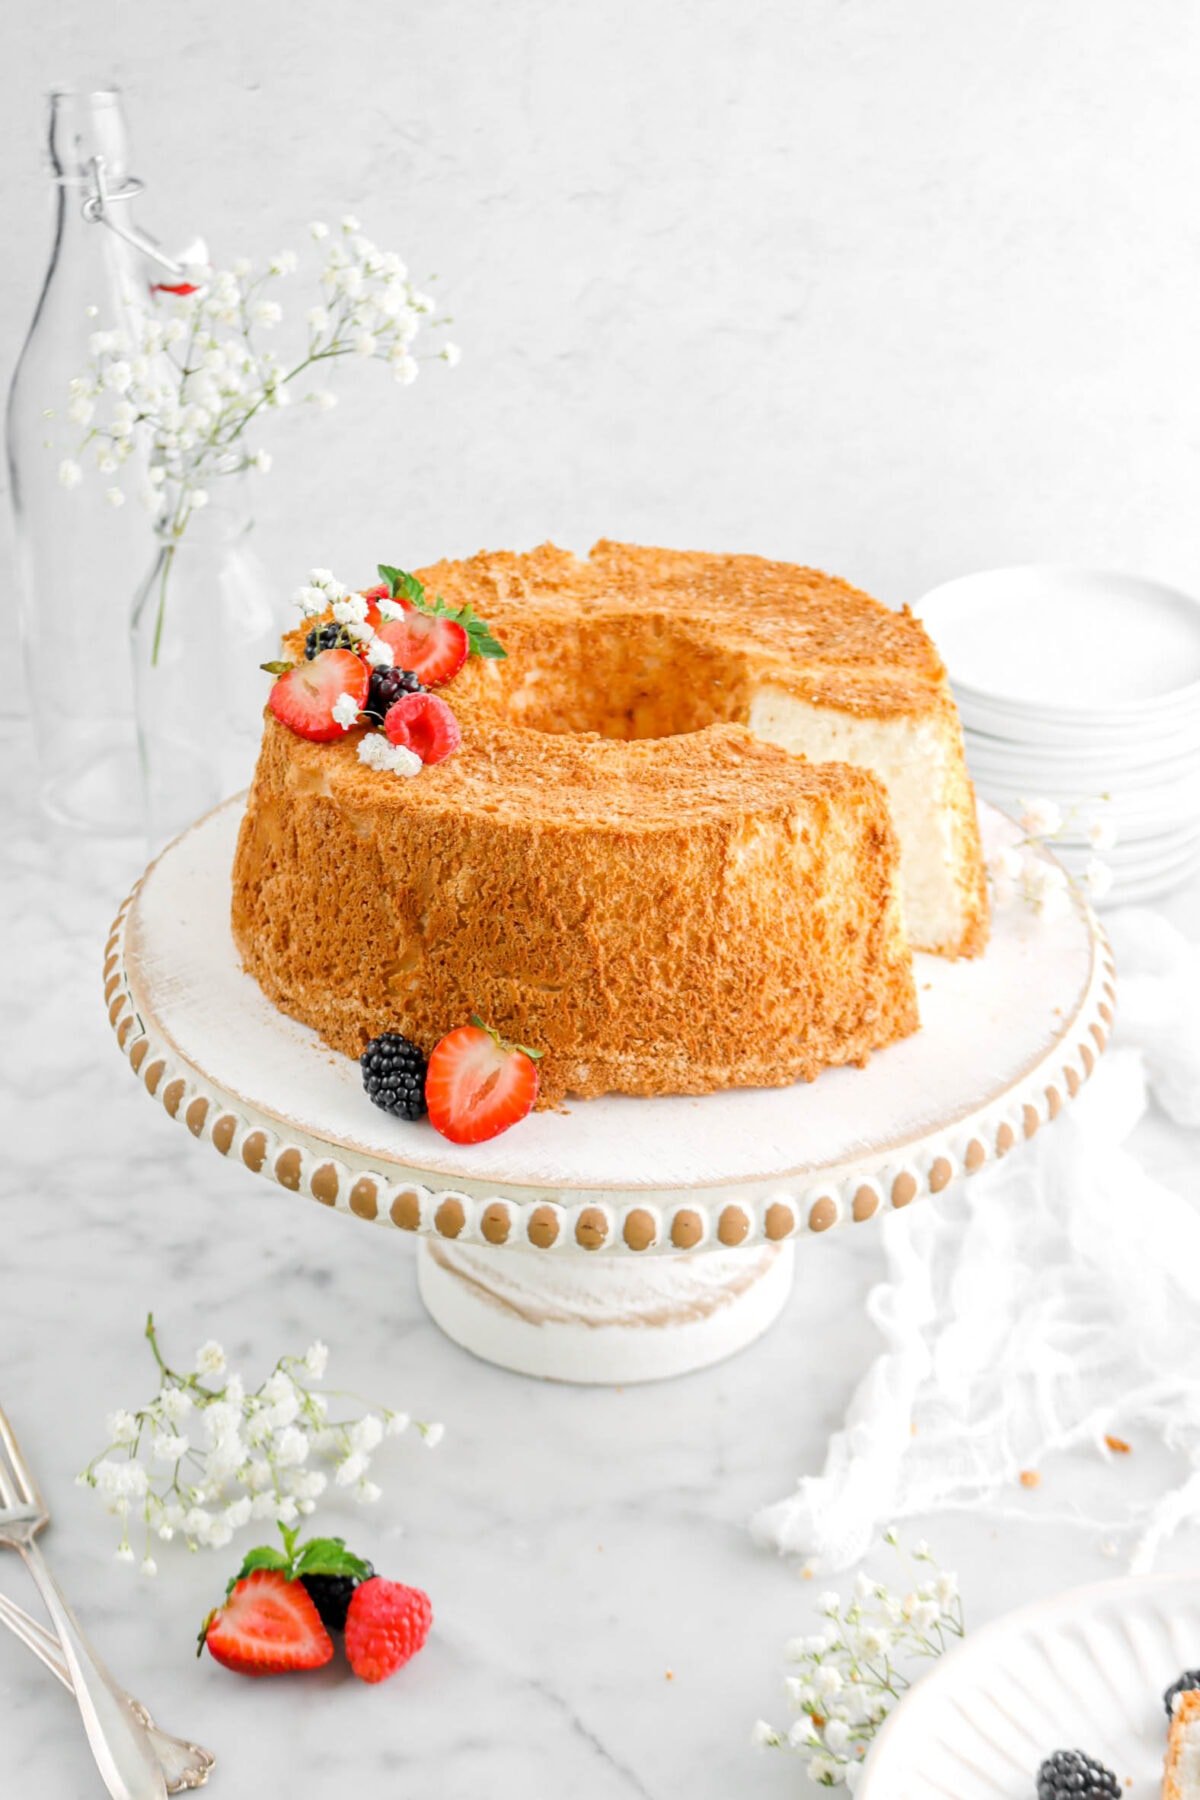 angel food cake with slice missing on white washed cake board with berries on top, fresh mind sprig, and white flowers with cheesecloth beside and forks.